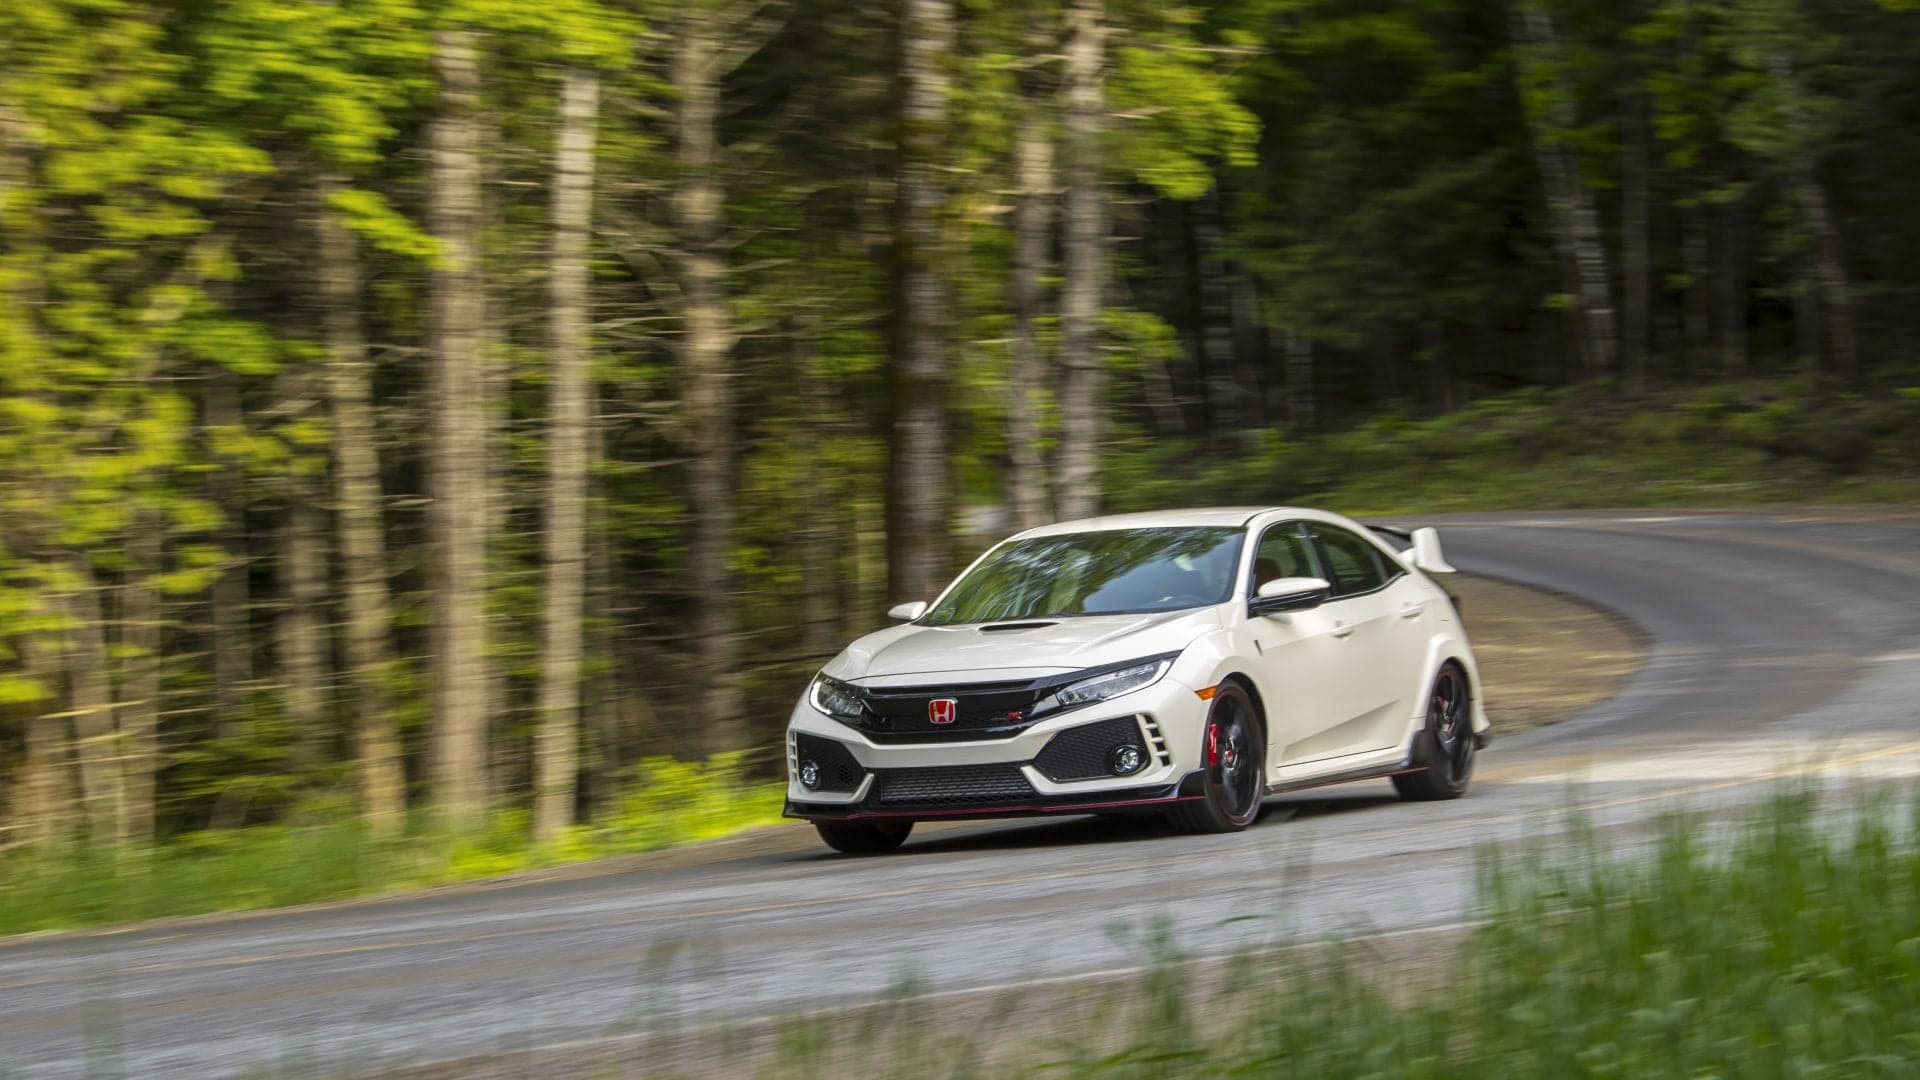 More Proof that a Cheaper, Entry-Level Honda Civic Type R Will Be Available Next Year